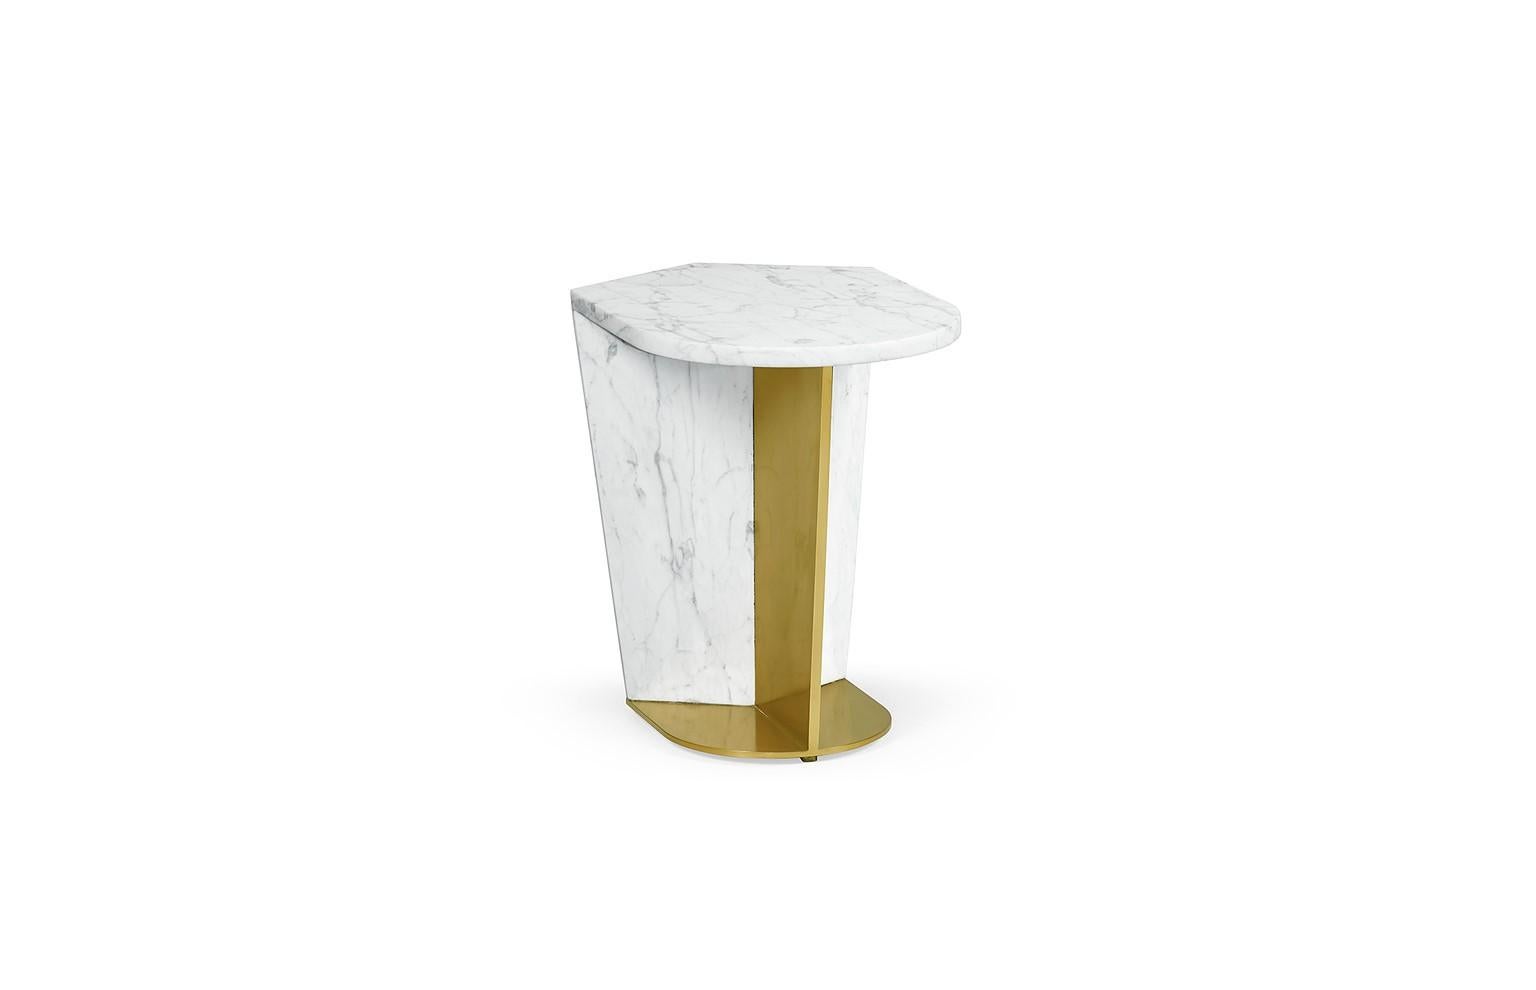 A sculptural piece with an unmistakable presence, this contemporary side table is crafted from white Calacatta marble and fully loaded brass. This luxurious  product is crafted by skilled artisans.

Materials: White Calacatta Marble,